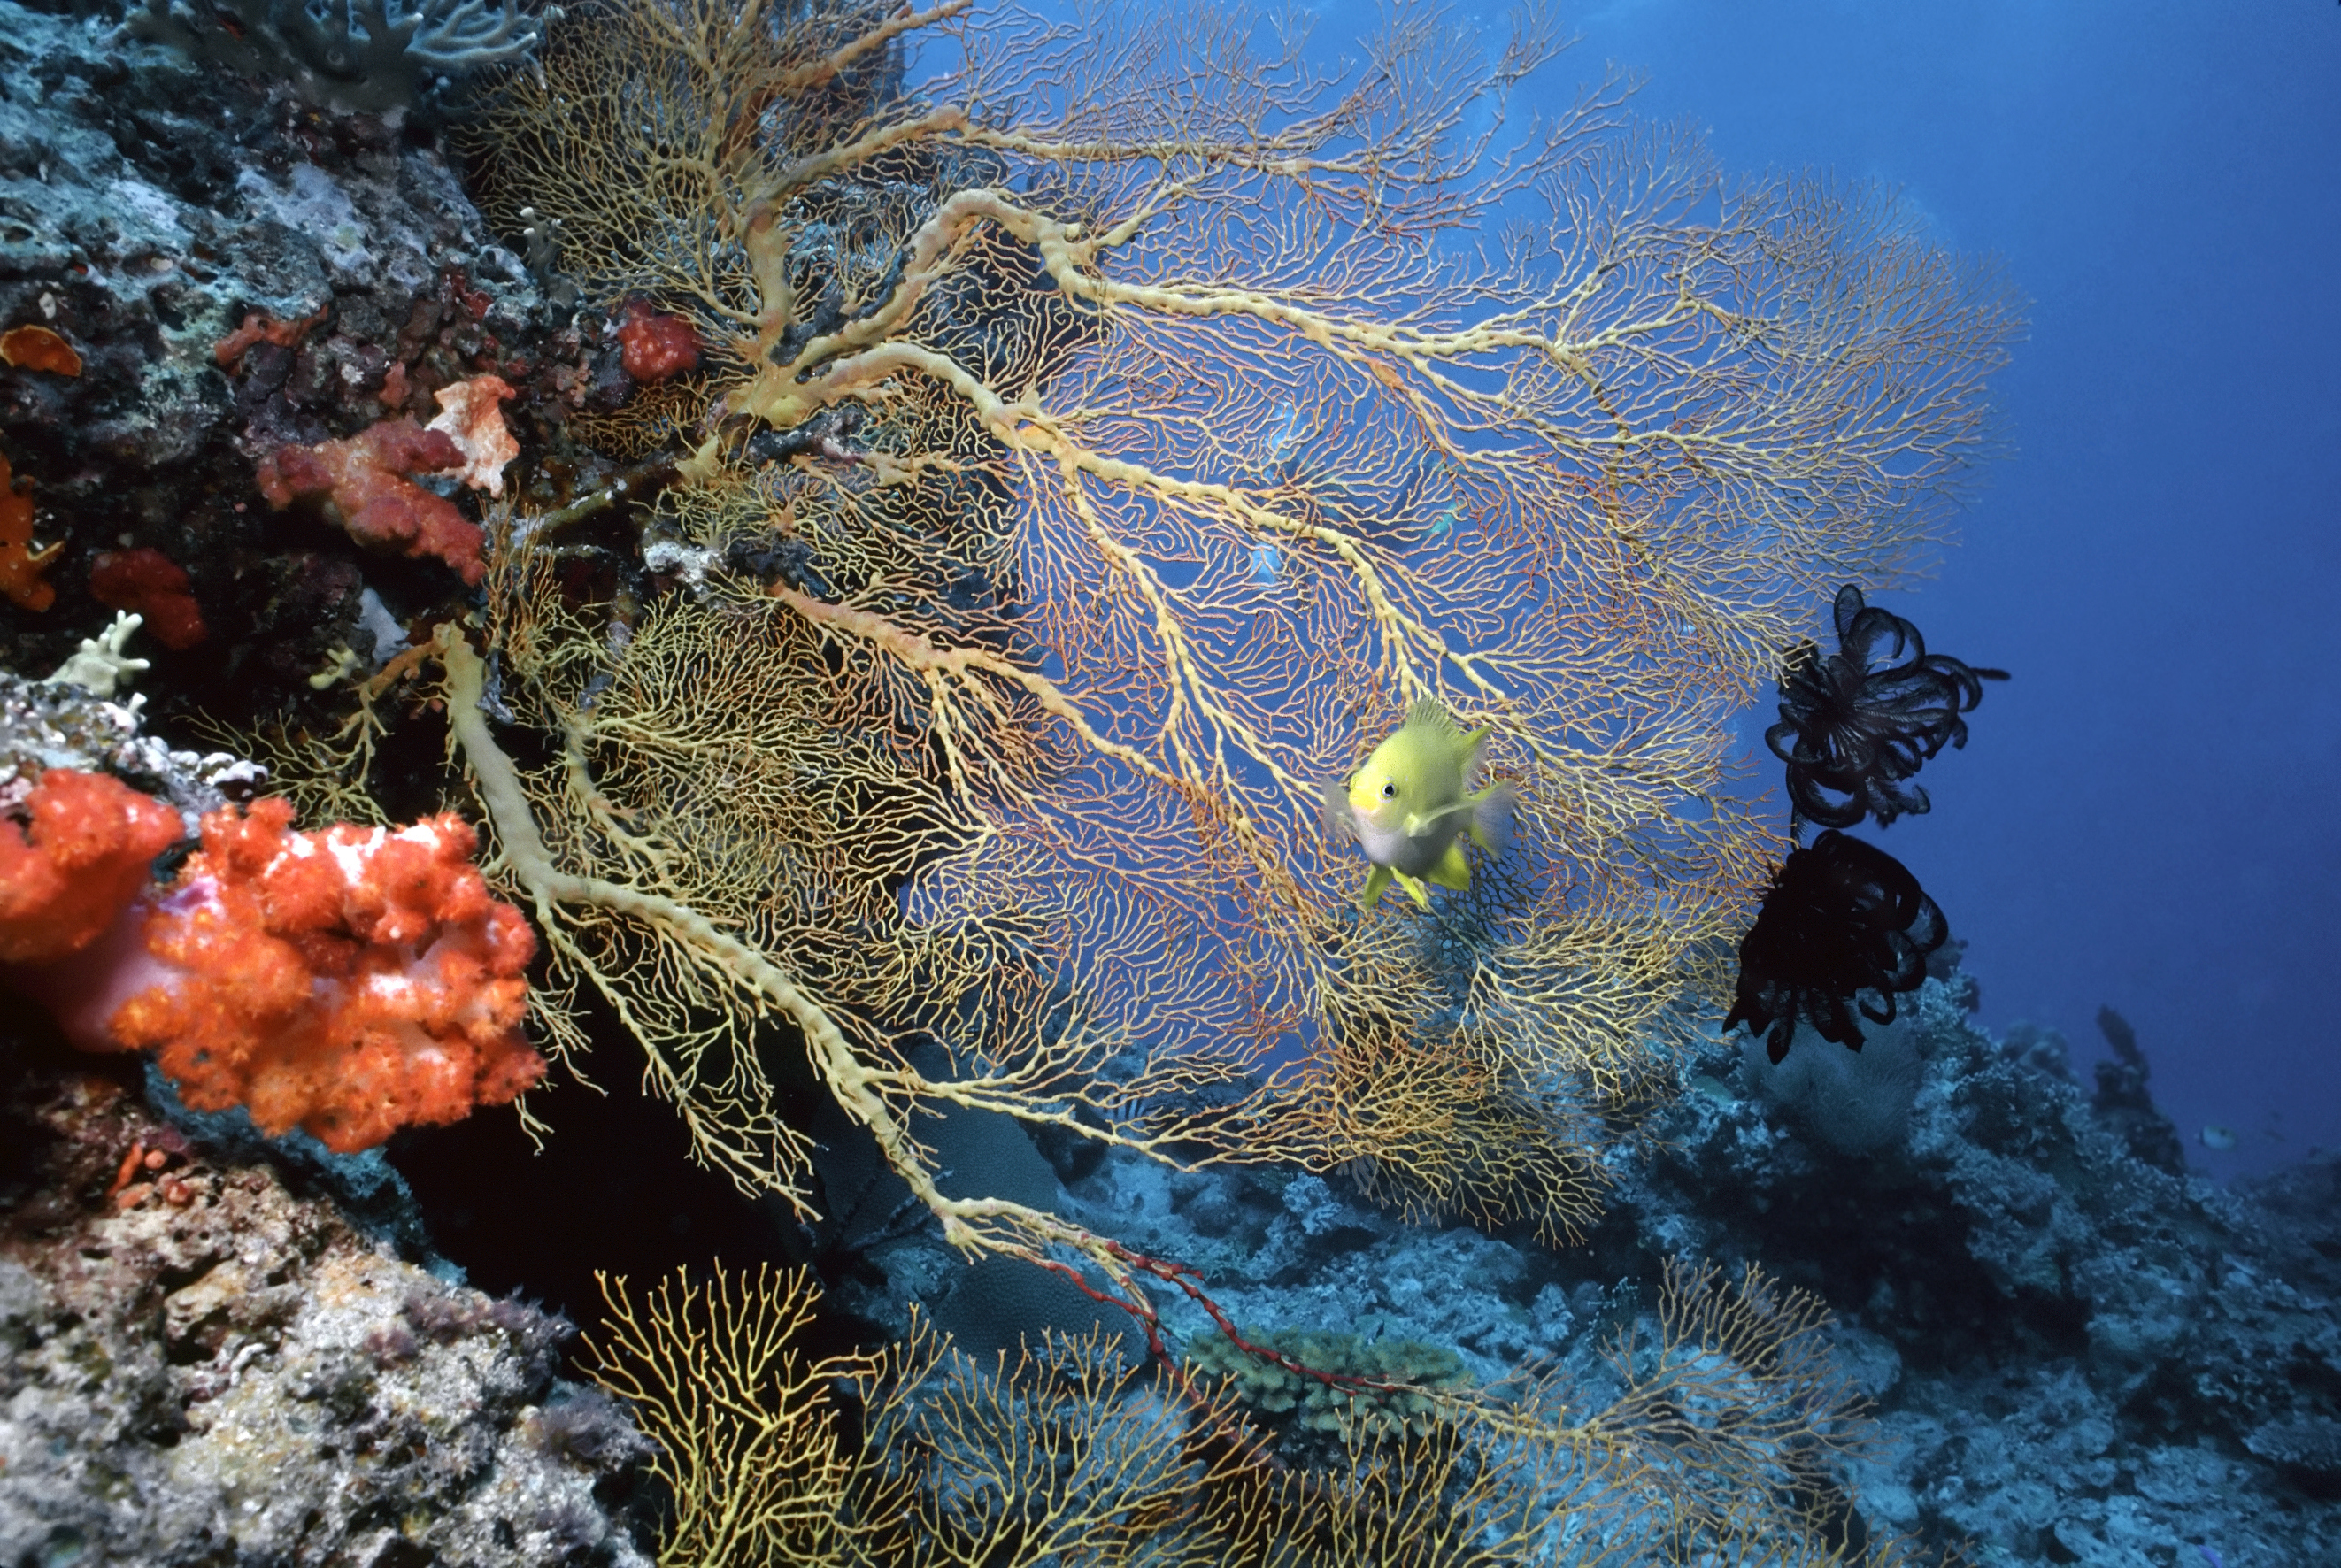 Coral Reef near the Soloman Islands